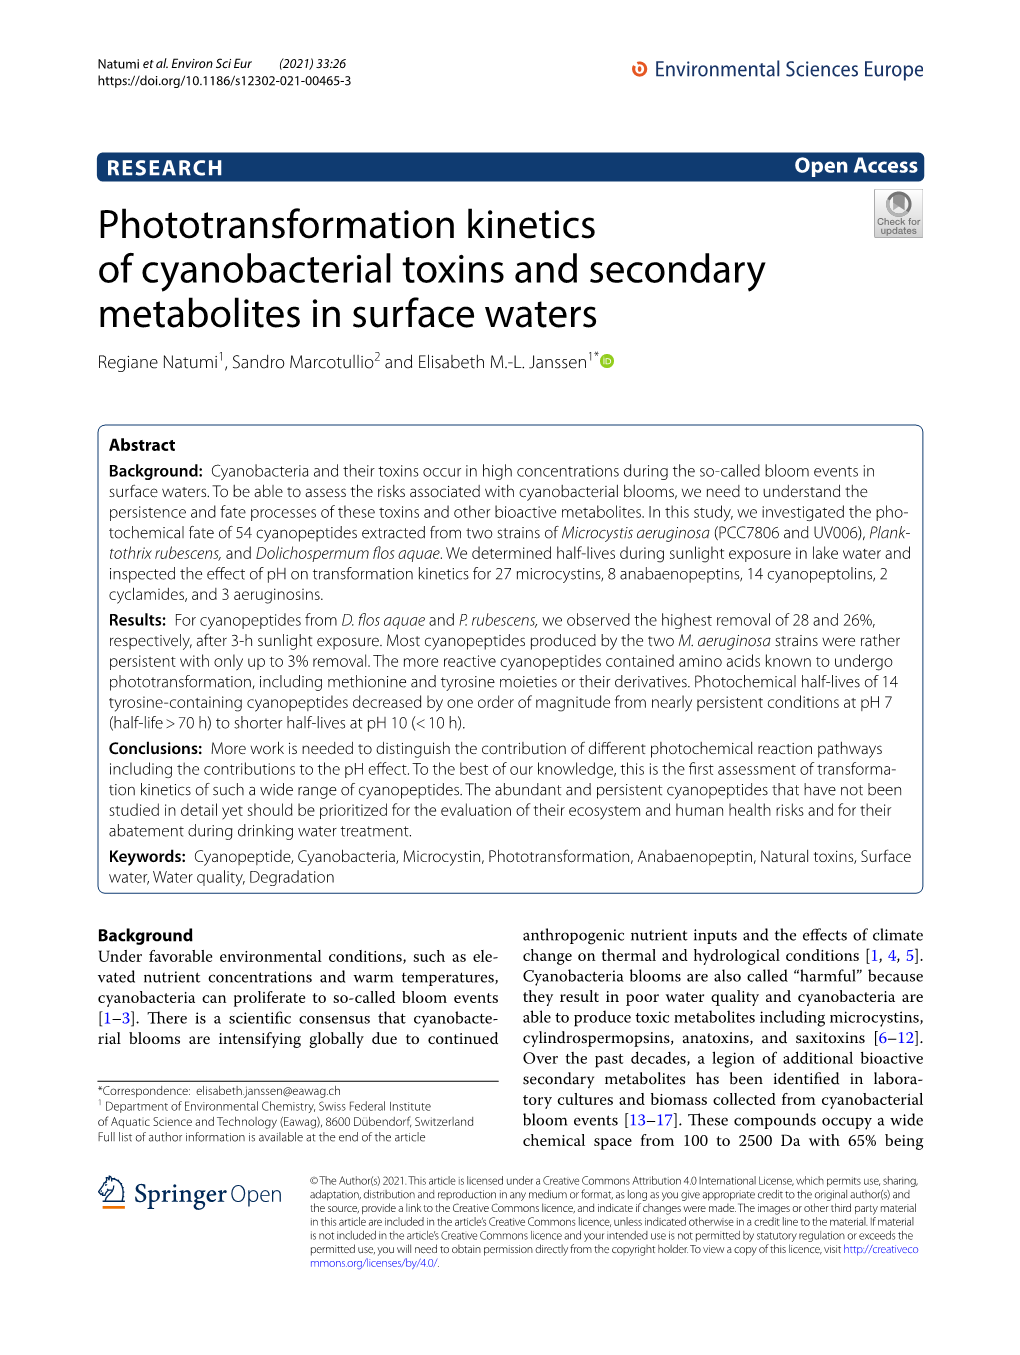 Phototransformation Kinetics of Cyanobacterial Toxins and Secondary Metabolites in Surface Waters Regiane Natumi1, Sandro Marcotullio2 and Elisabeth M.‑L